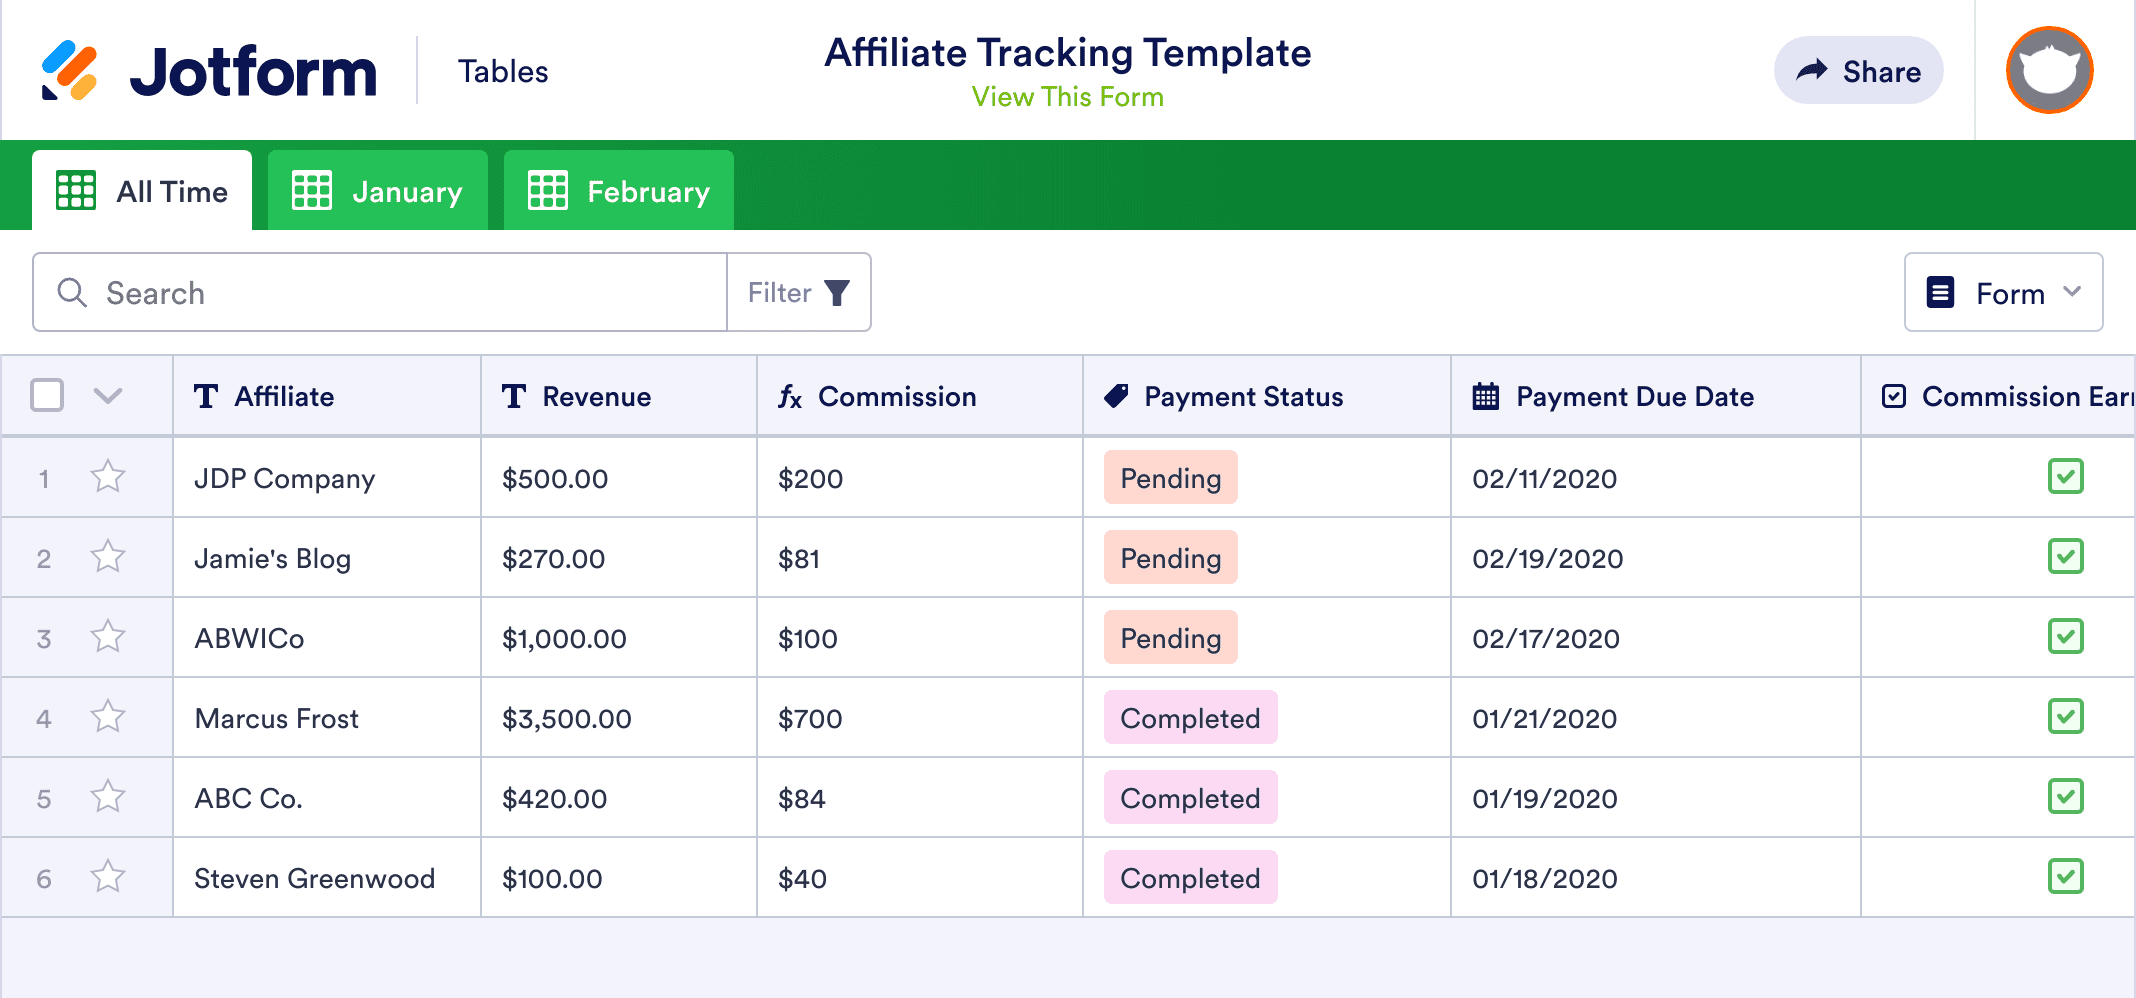 Affiliate Tracking Template